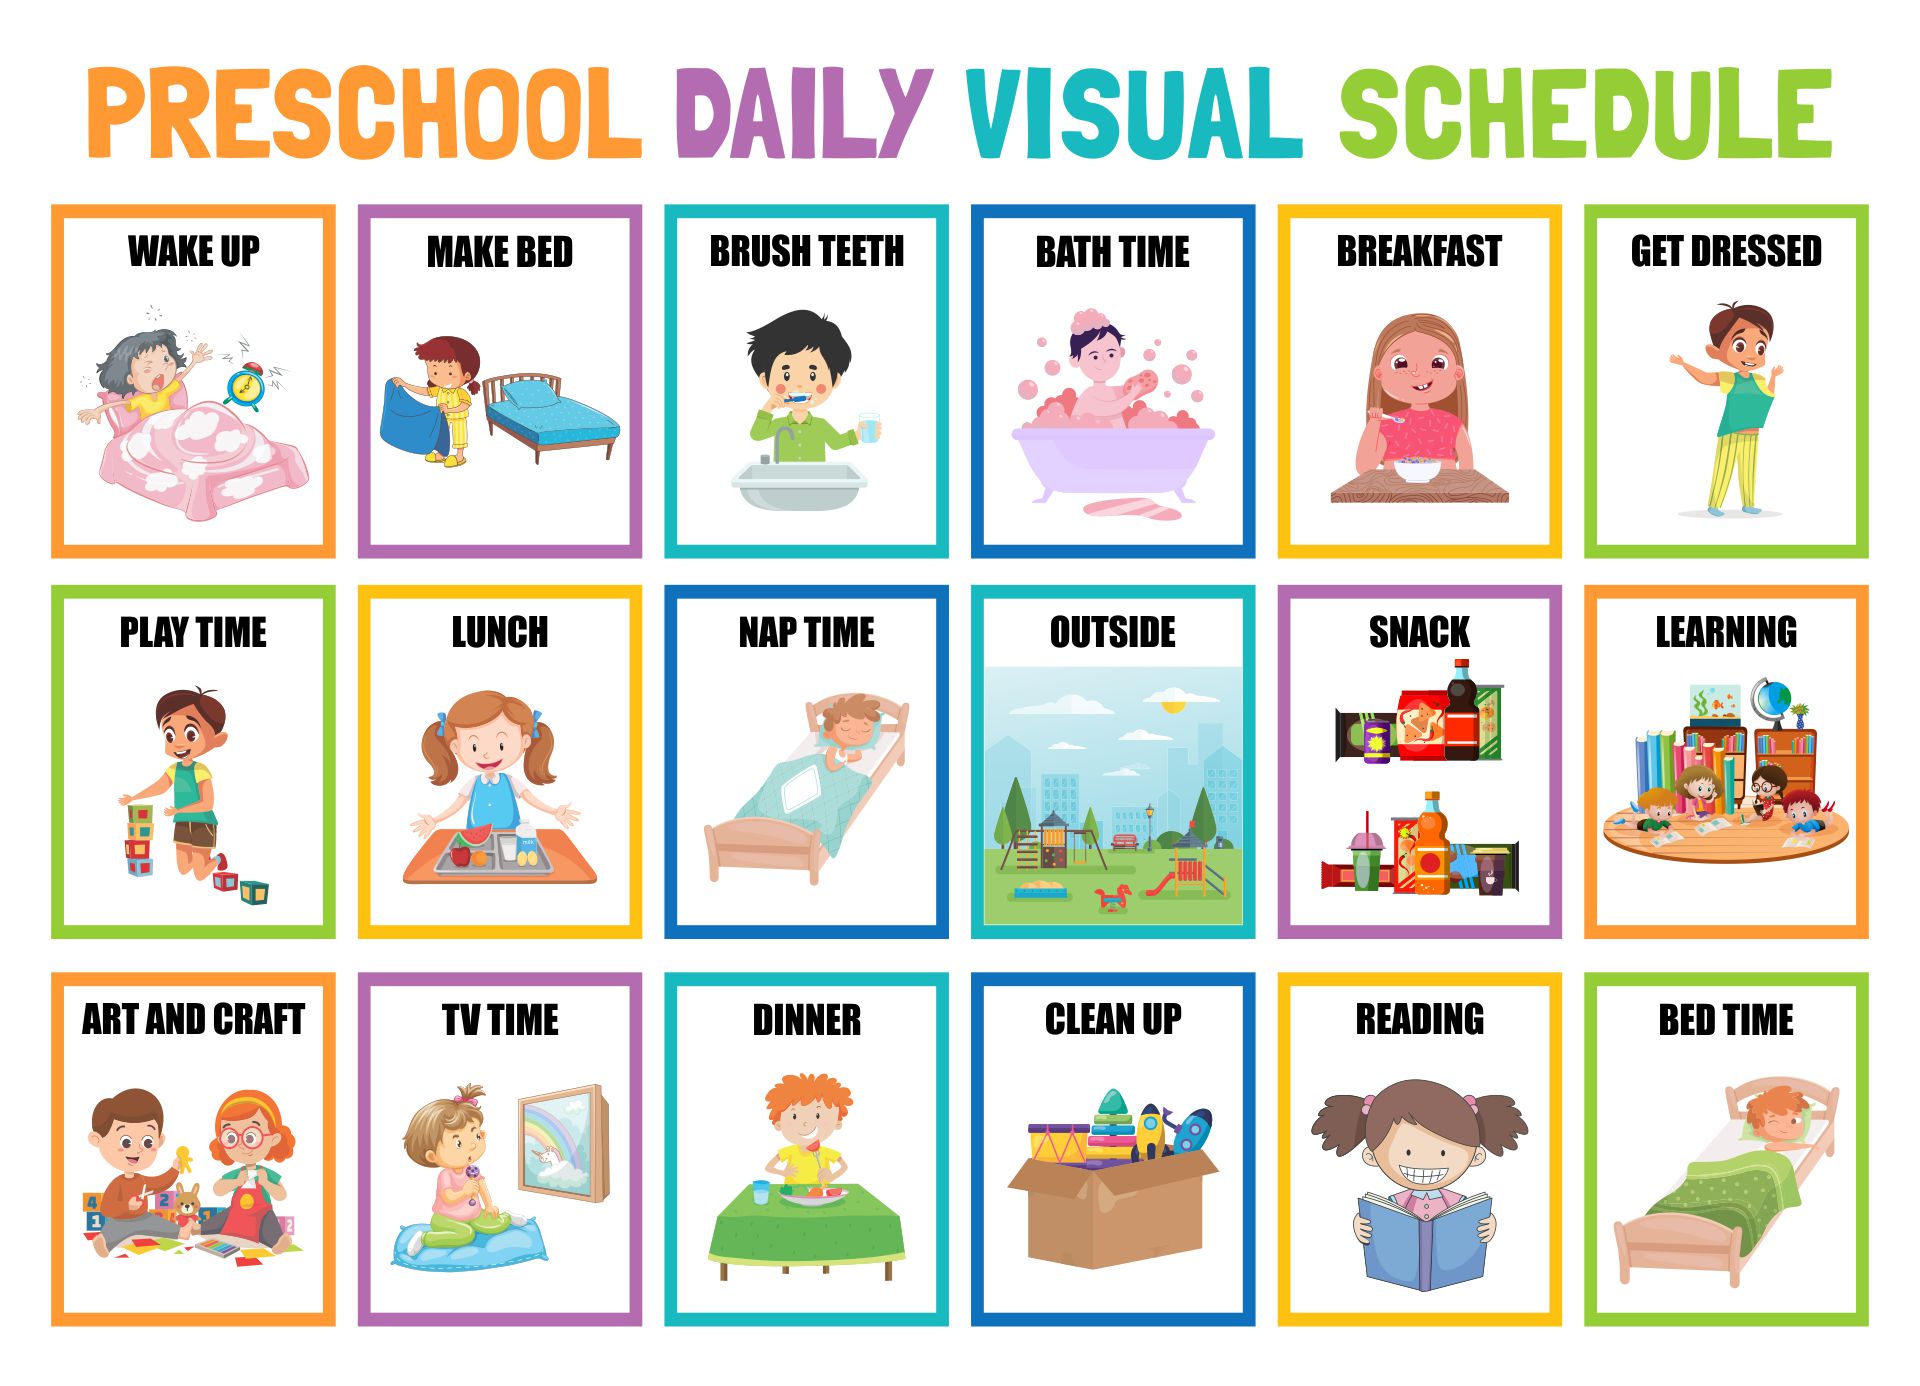 daily schedule for kids template editable